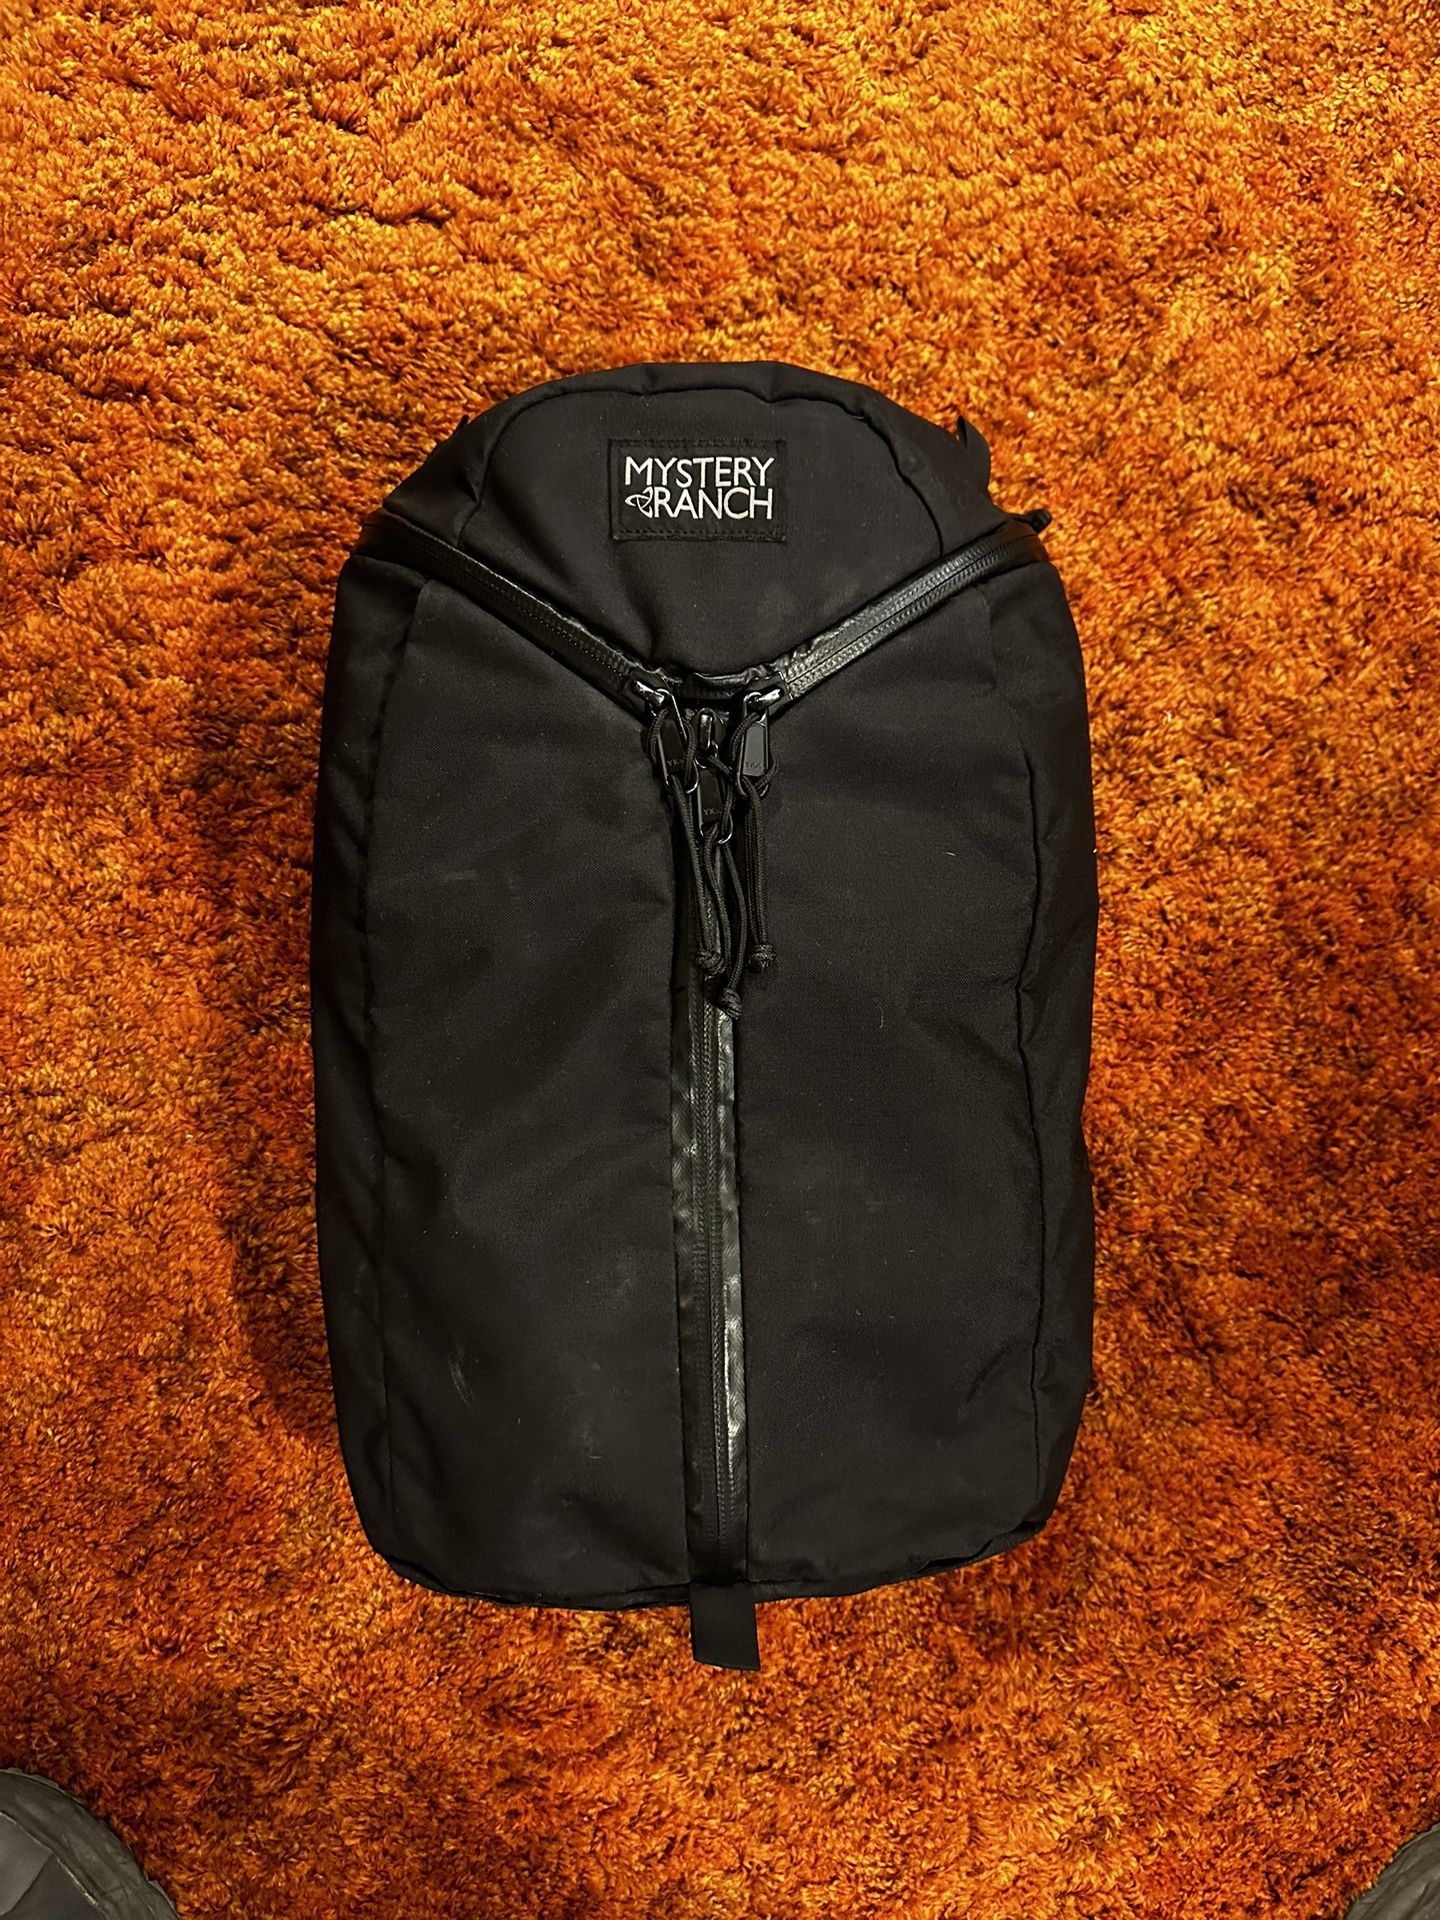 Mystery Ranch Urban backpack